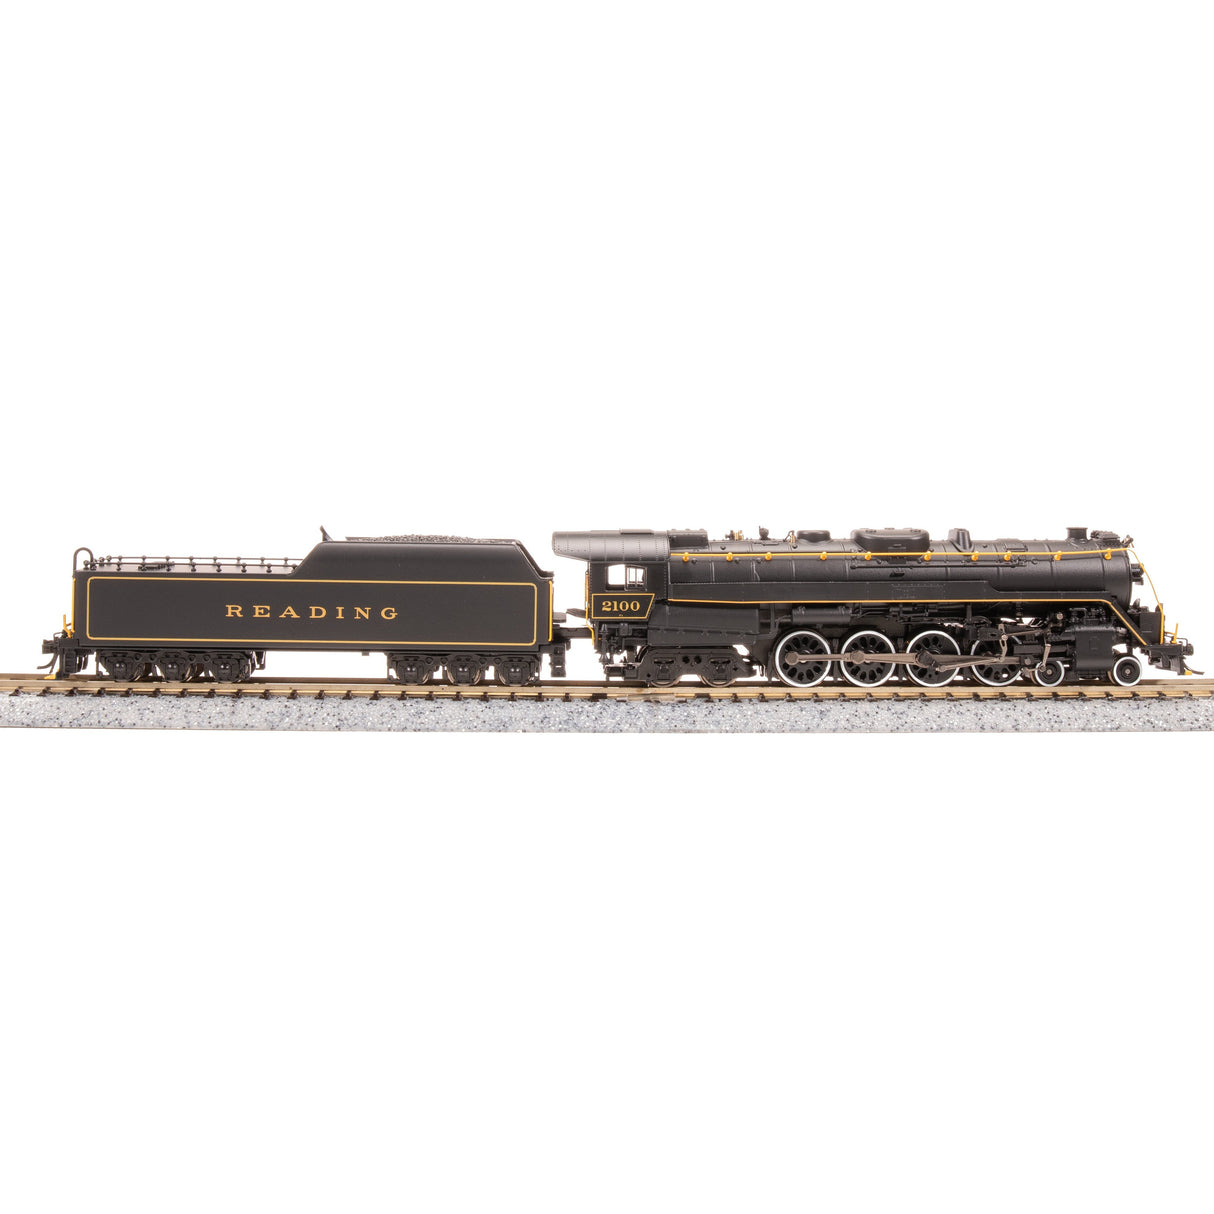 Broadway Limited N Scale Reading T-1 4-8-4 Steam Locomotive #2102/Excursion DC/DCC Sound